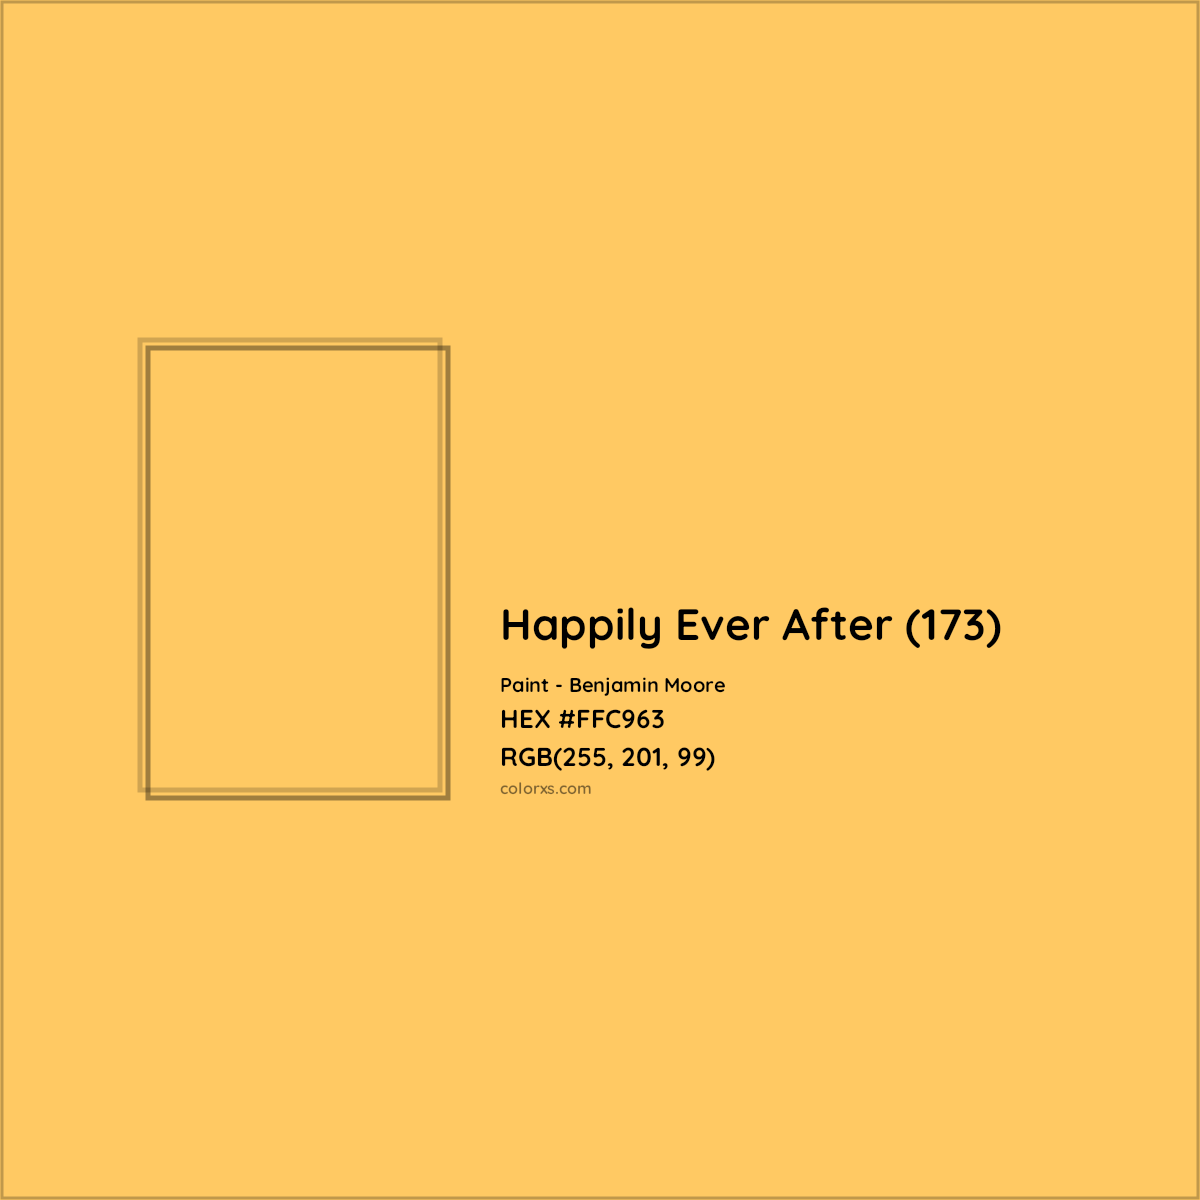 HEX #FFC963 Happily Ever After (173) Paint Benjamin Moore - Color Code